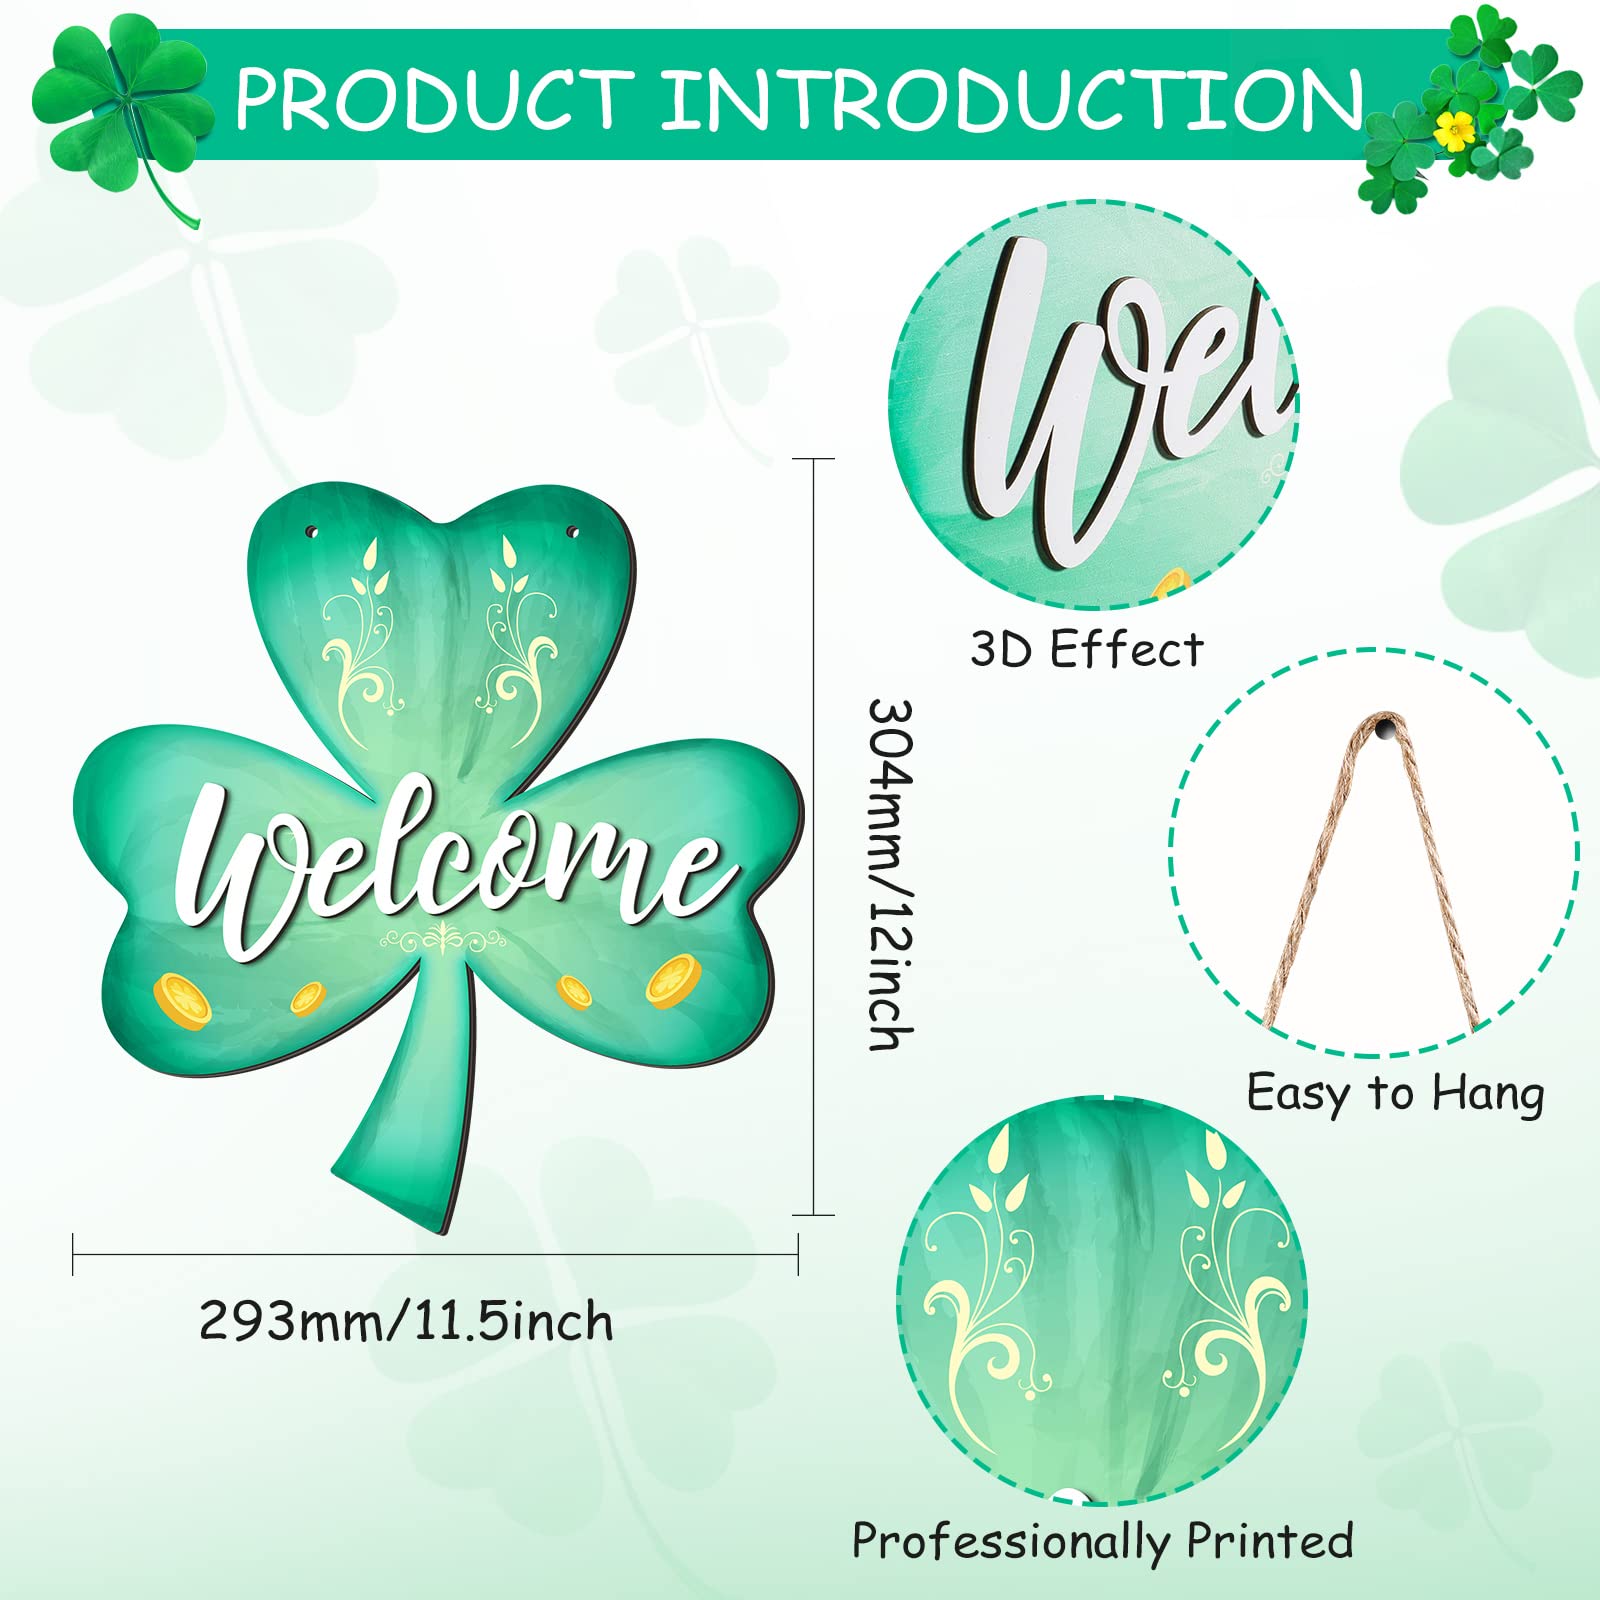 Jetec 12 x 11.5 Inch St. Patrick's Wall Pediments Wooden Irish Hanging Welcome Board Shamrock Plaques with Rope for St Patrick's Decor Window Home Wall Door Indoor Outdoor